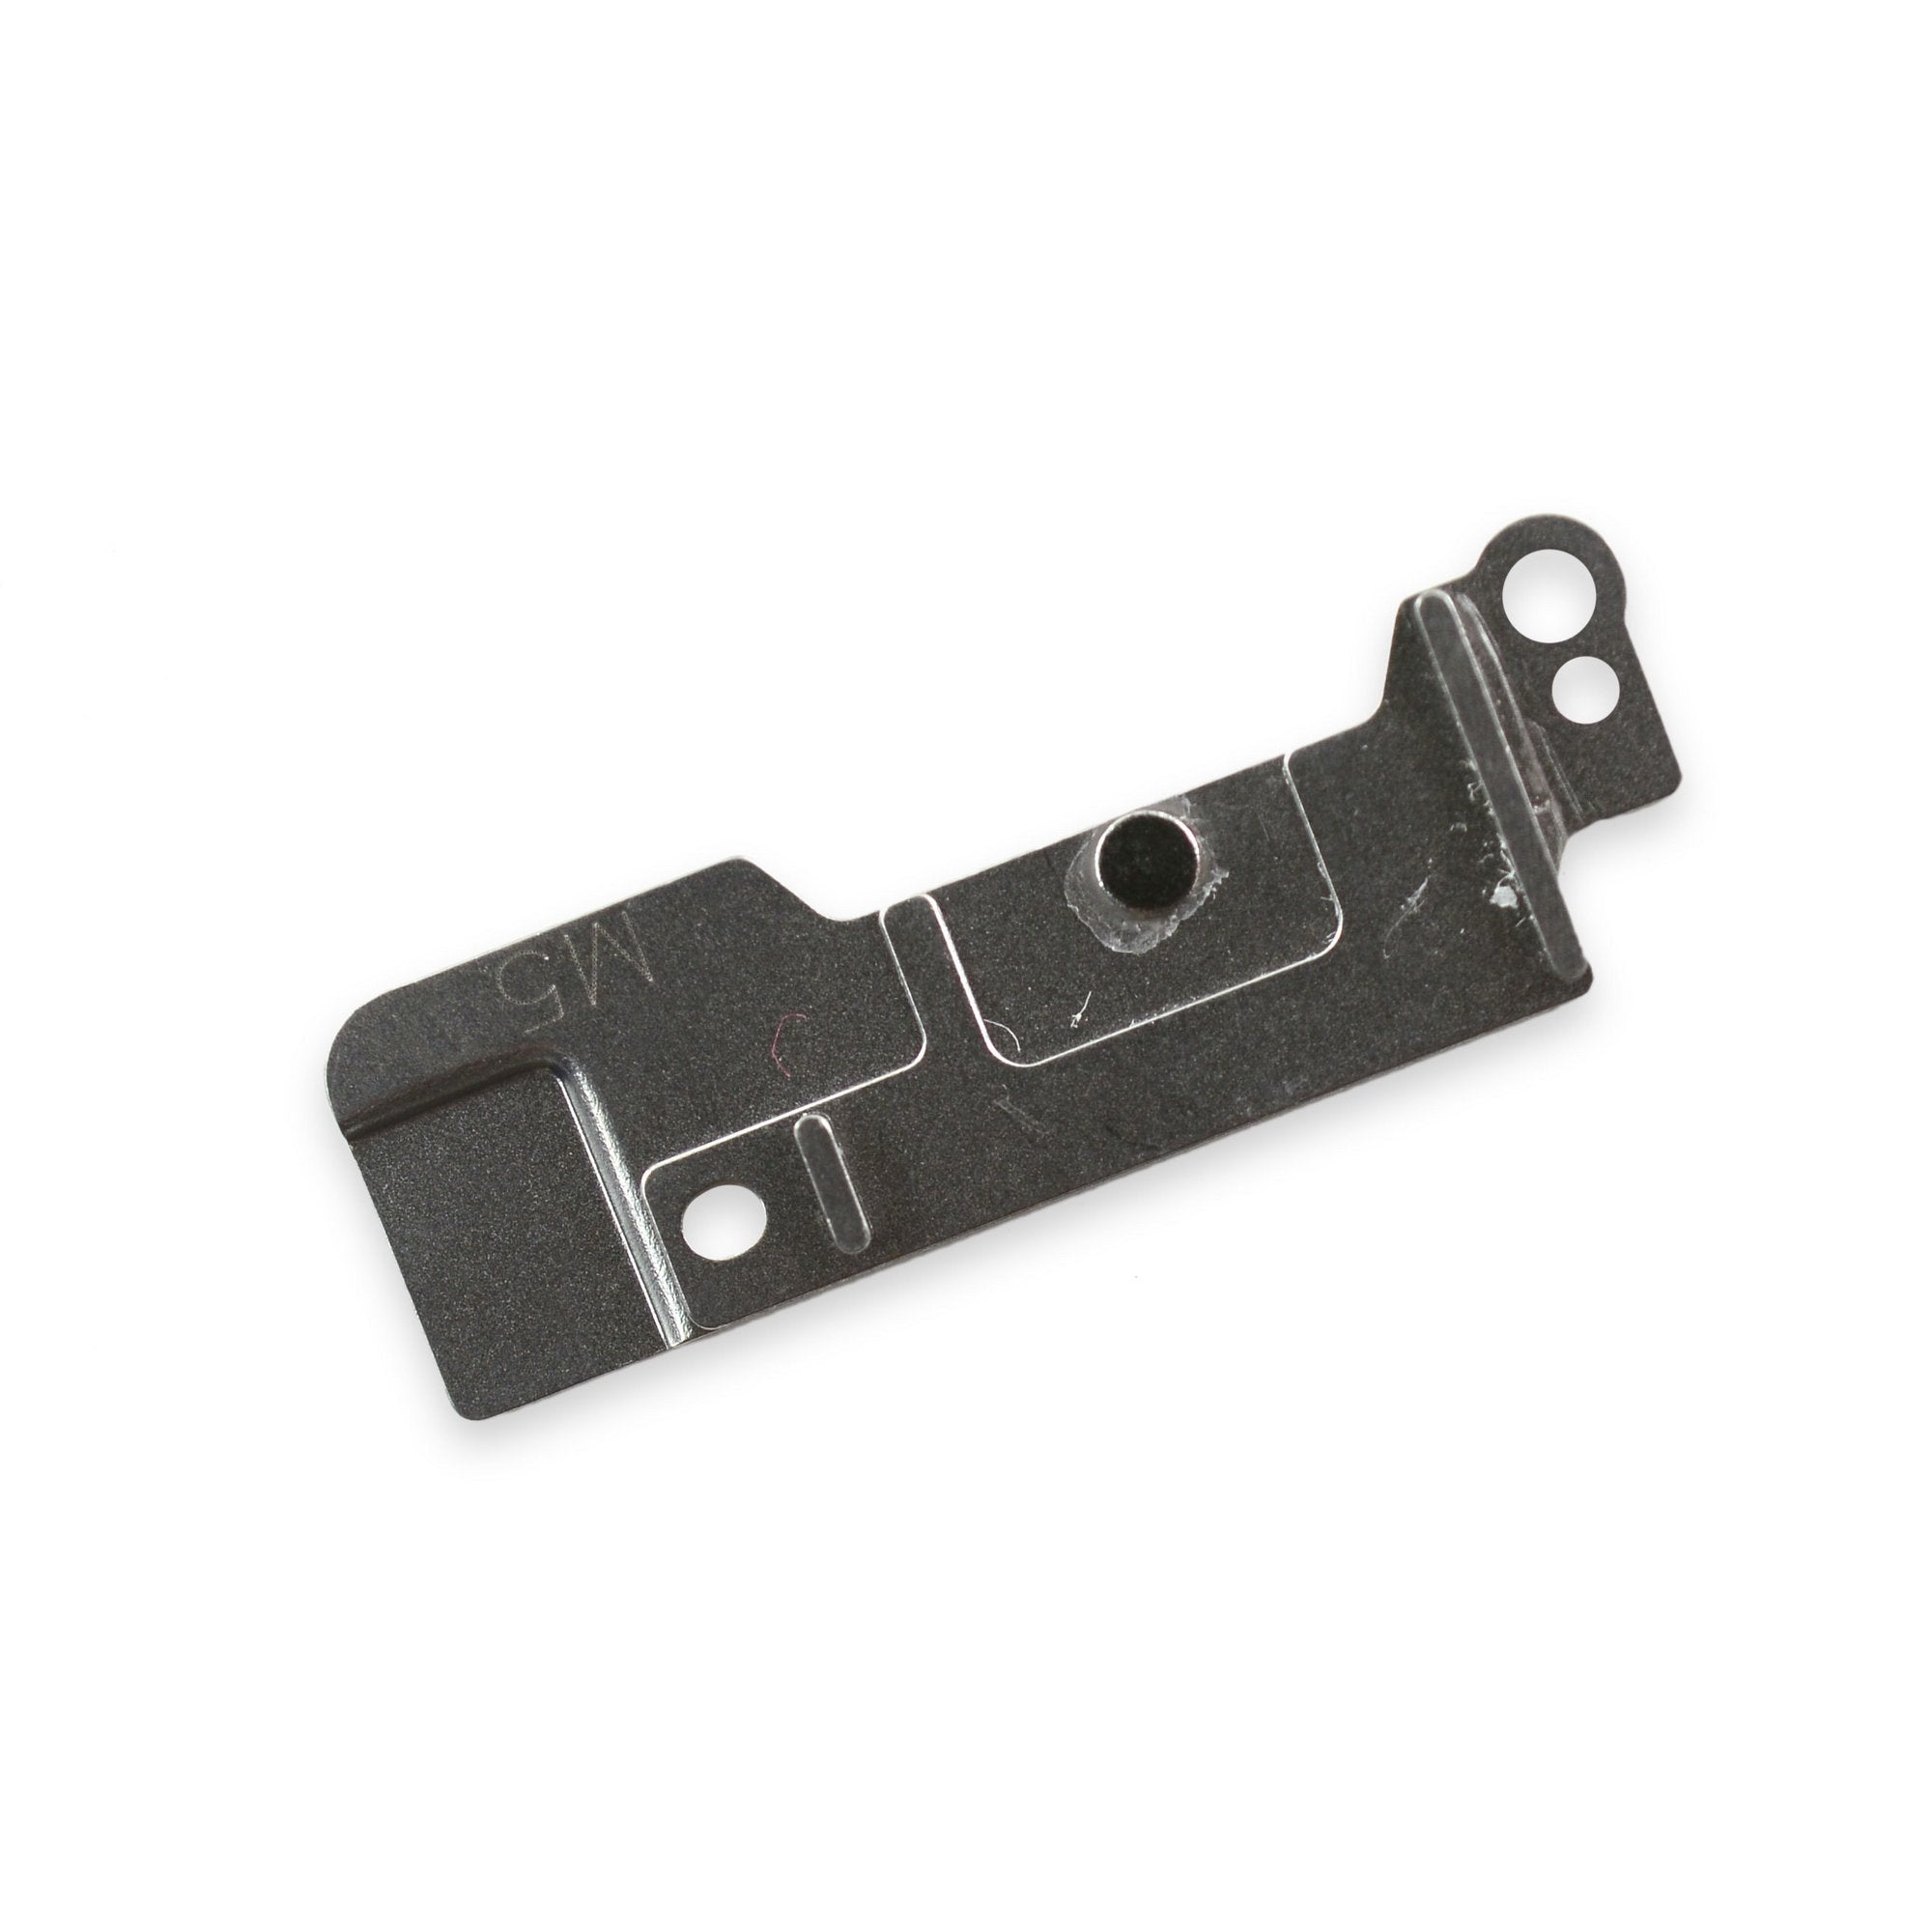 iPhone 6 and 6 Plus Home Button Bracket